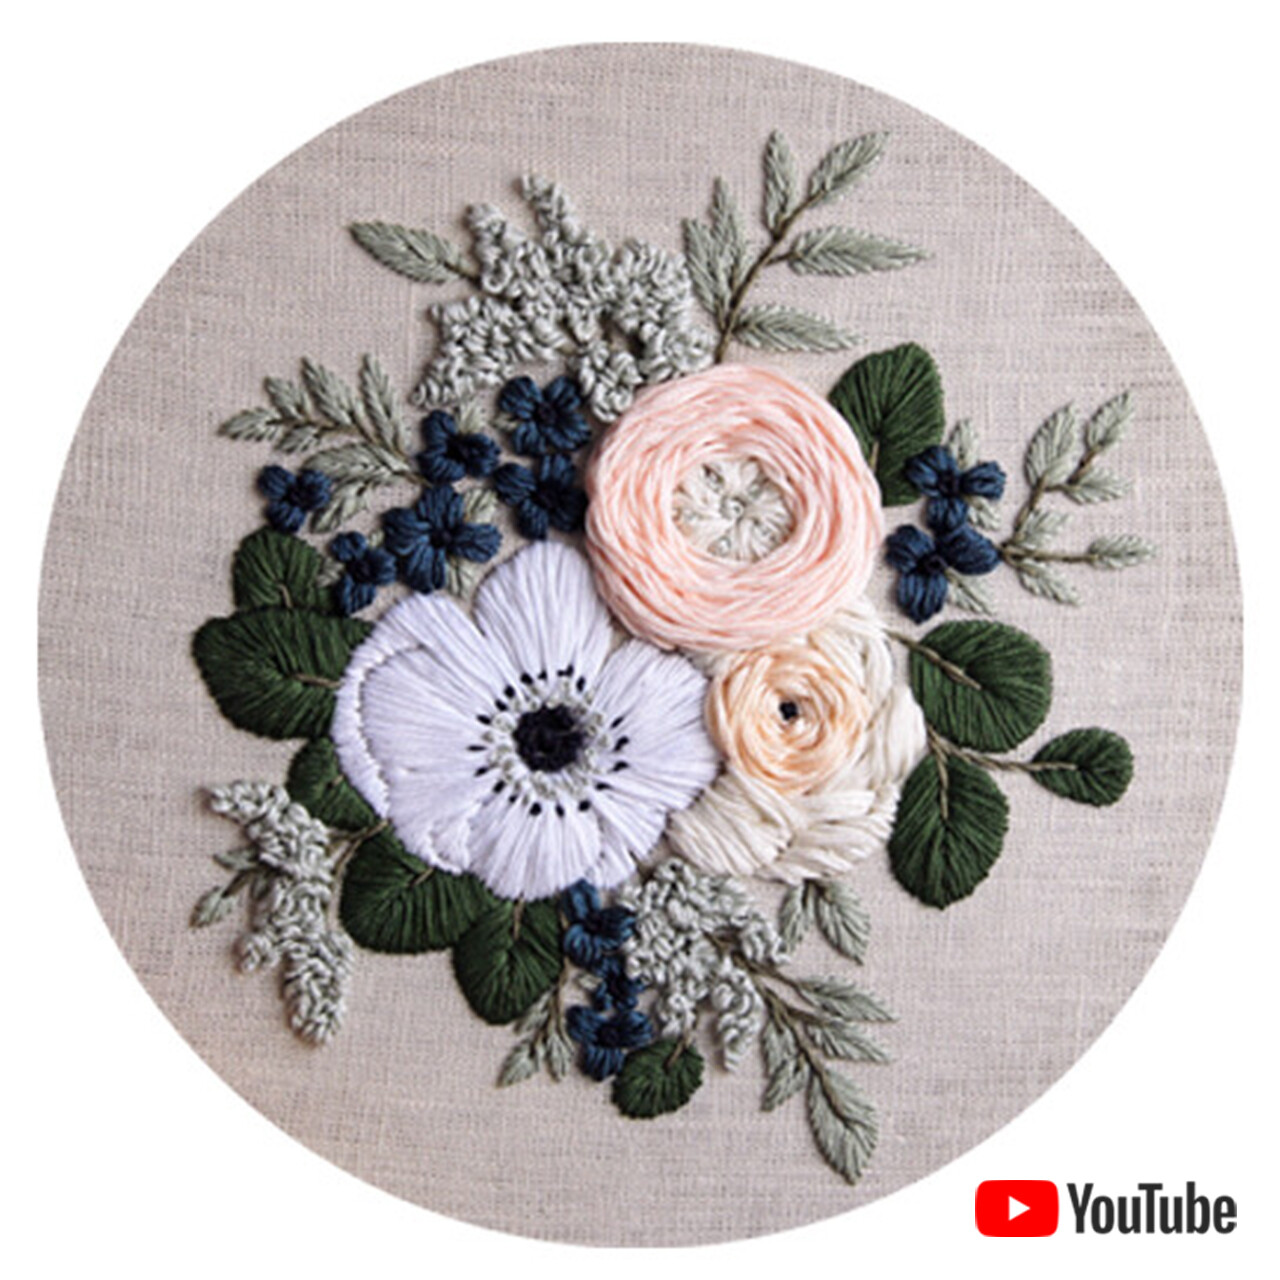 "Anemone and ranunculus bouquet" pdf pattern 20 or 26 cm (8" or 10") + video tutorial